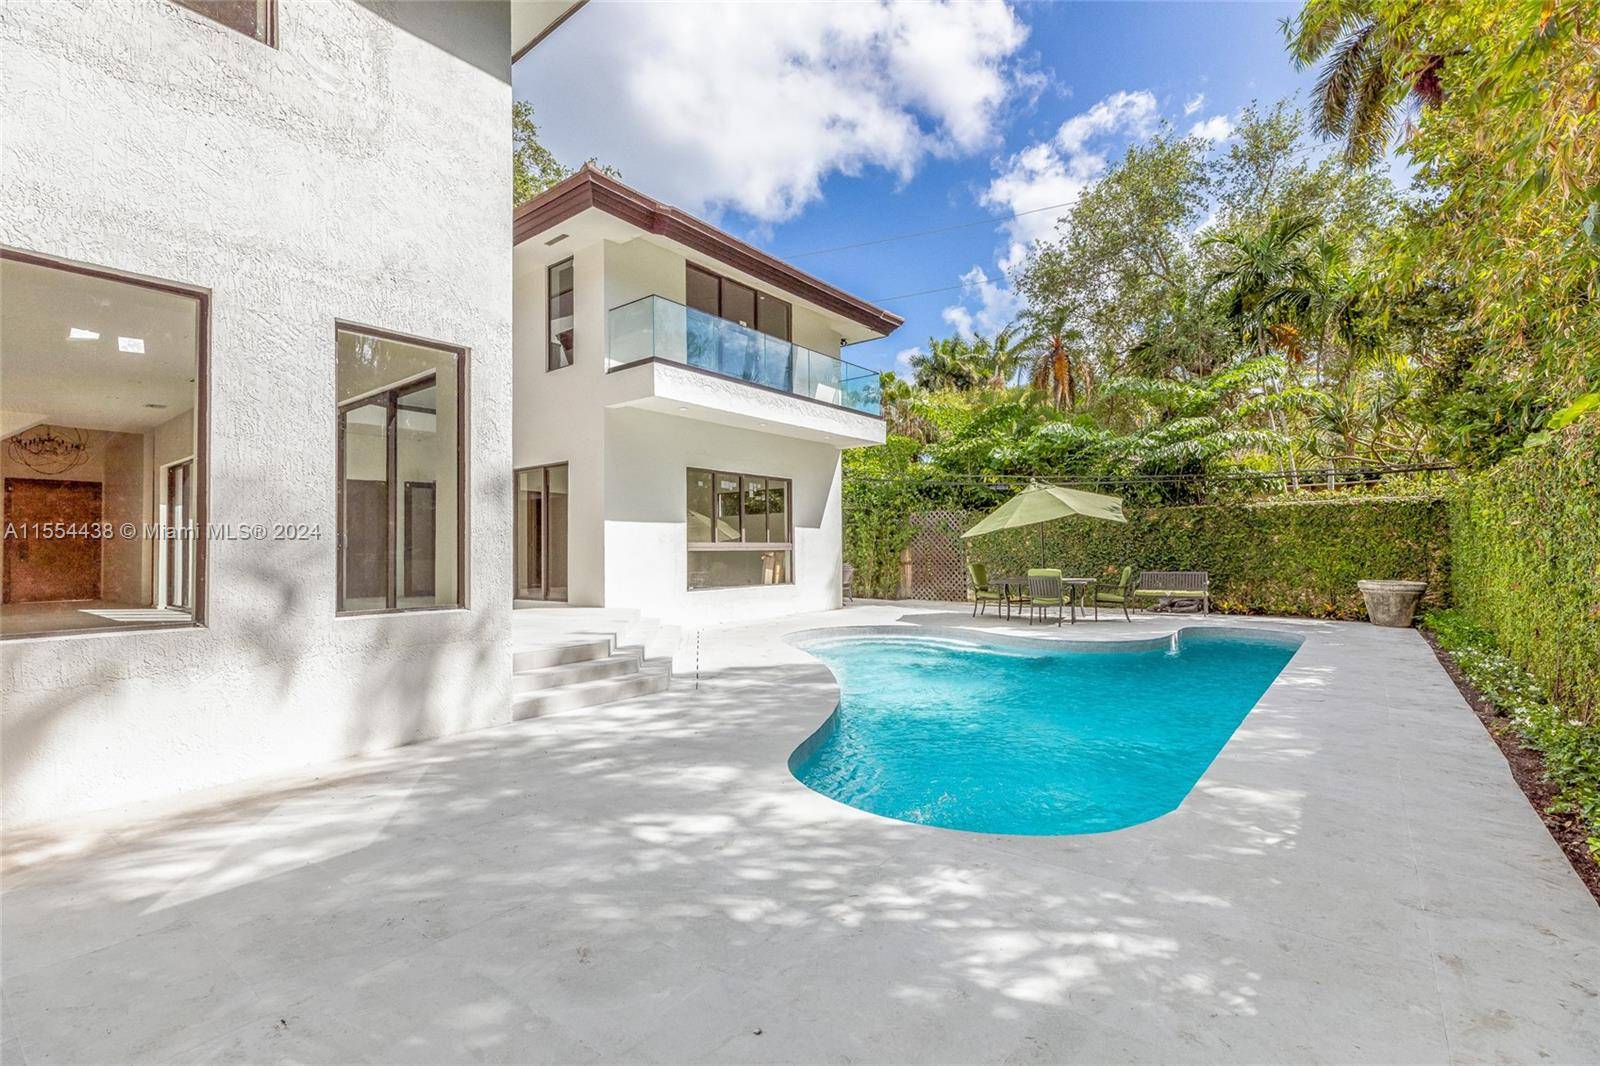 Contemporary House with pool in the heart of Coconut Grove.